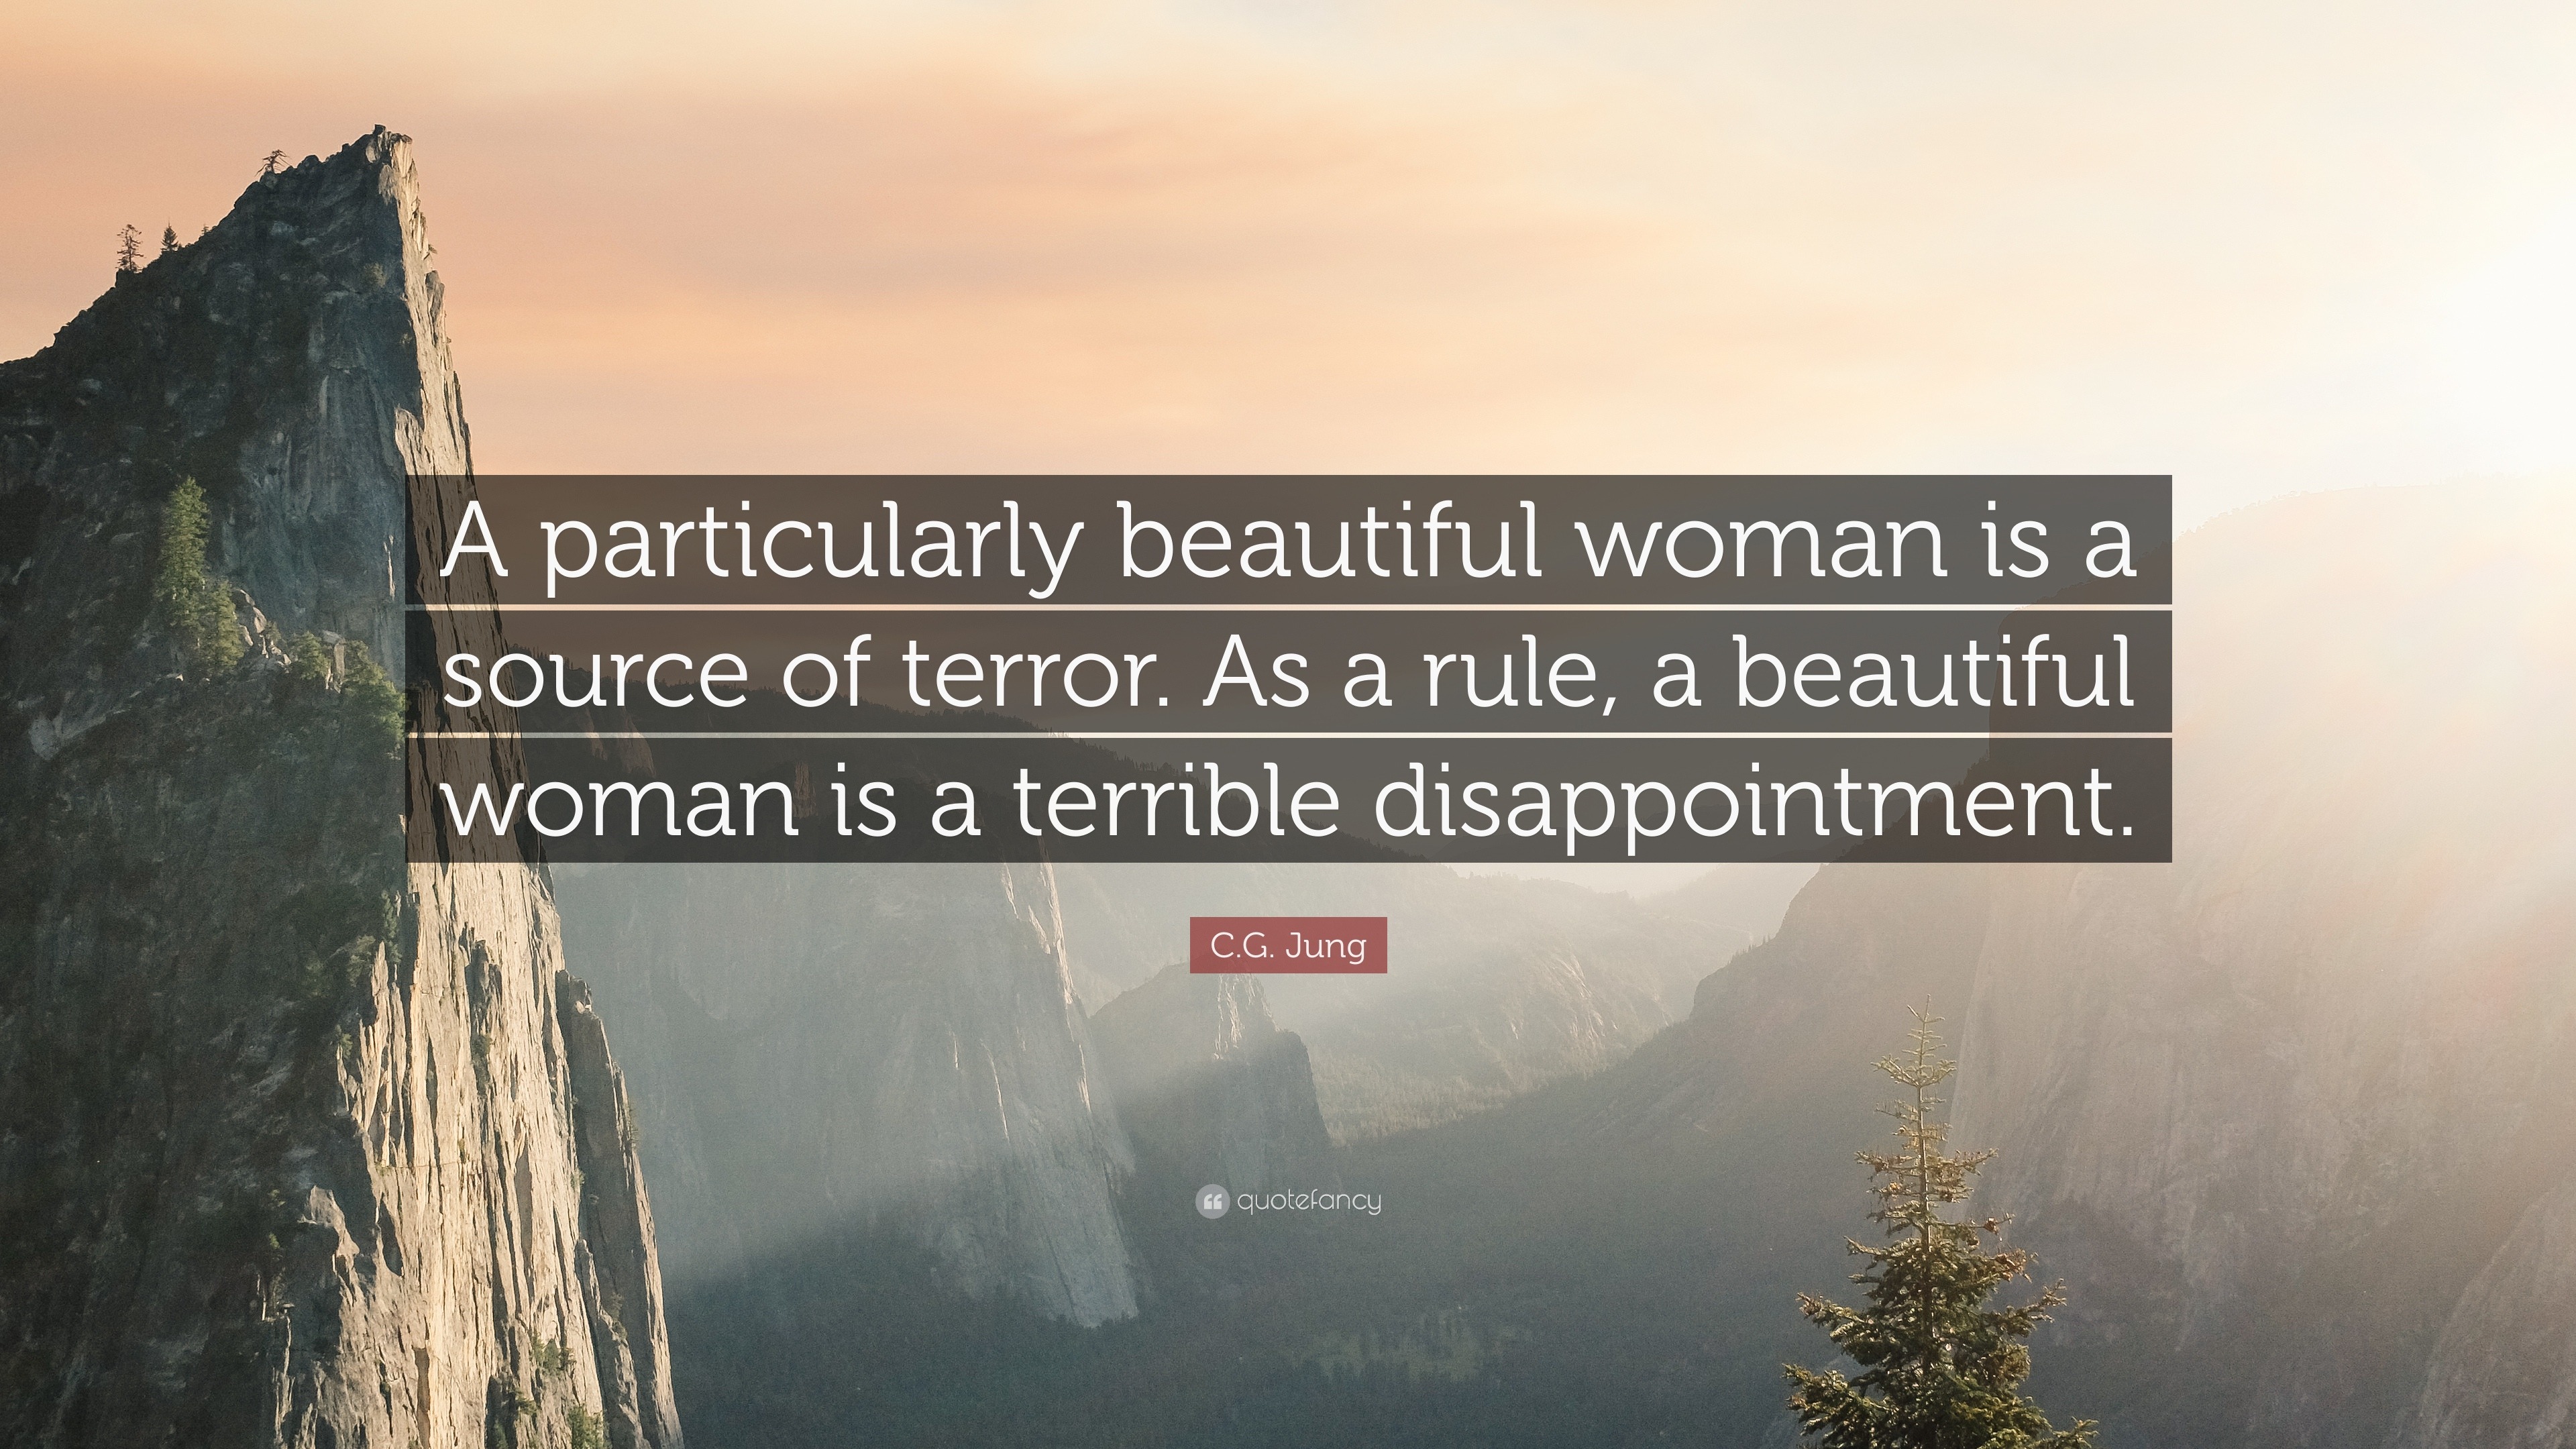 C.G. Jung Quote: “A particularly beautiful woman is a source of terror ...